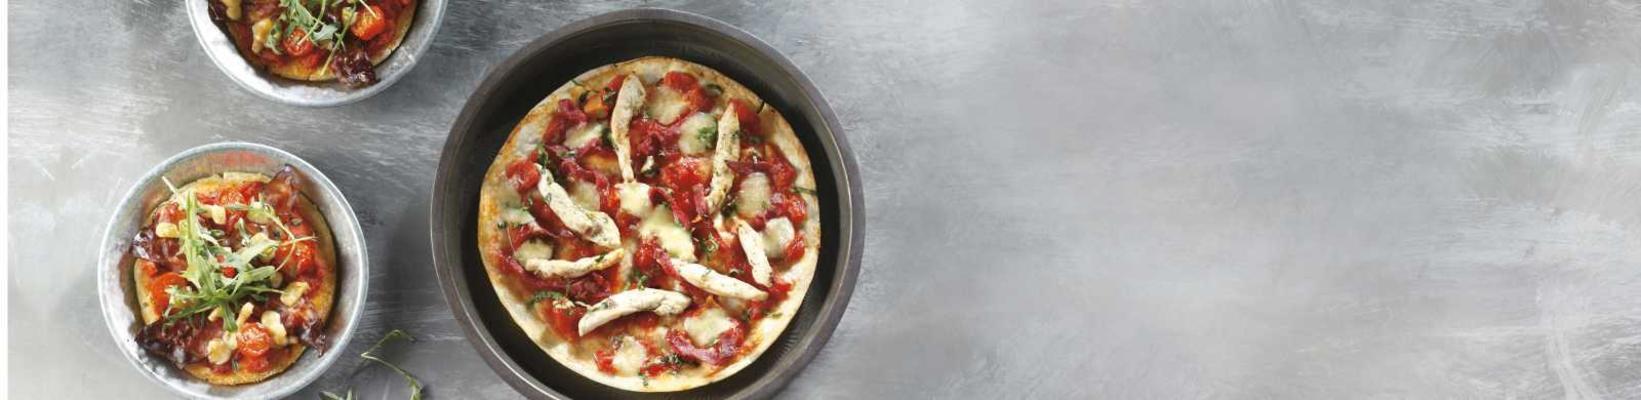 tortilla pizza with chicken and salami